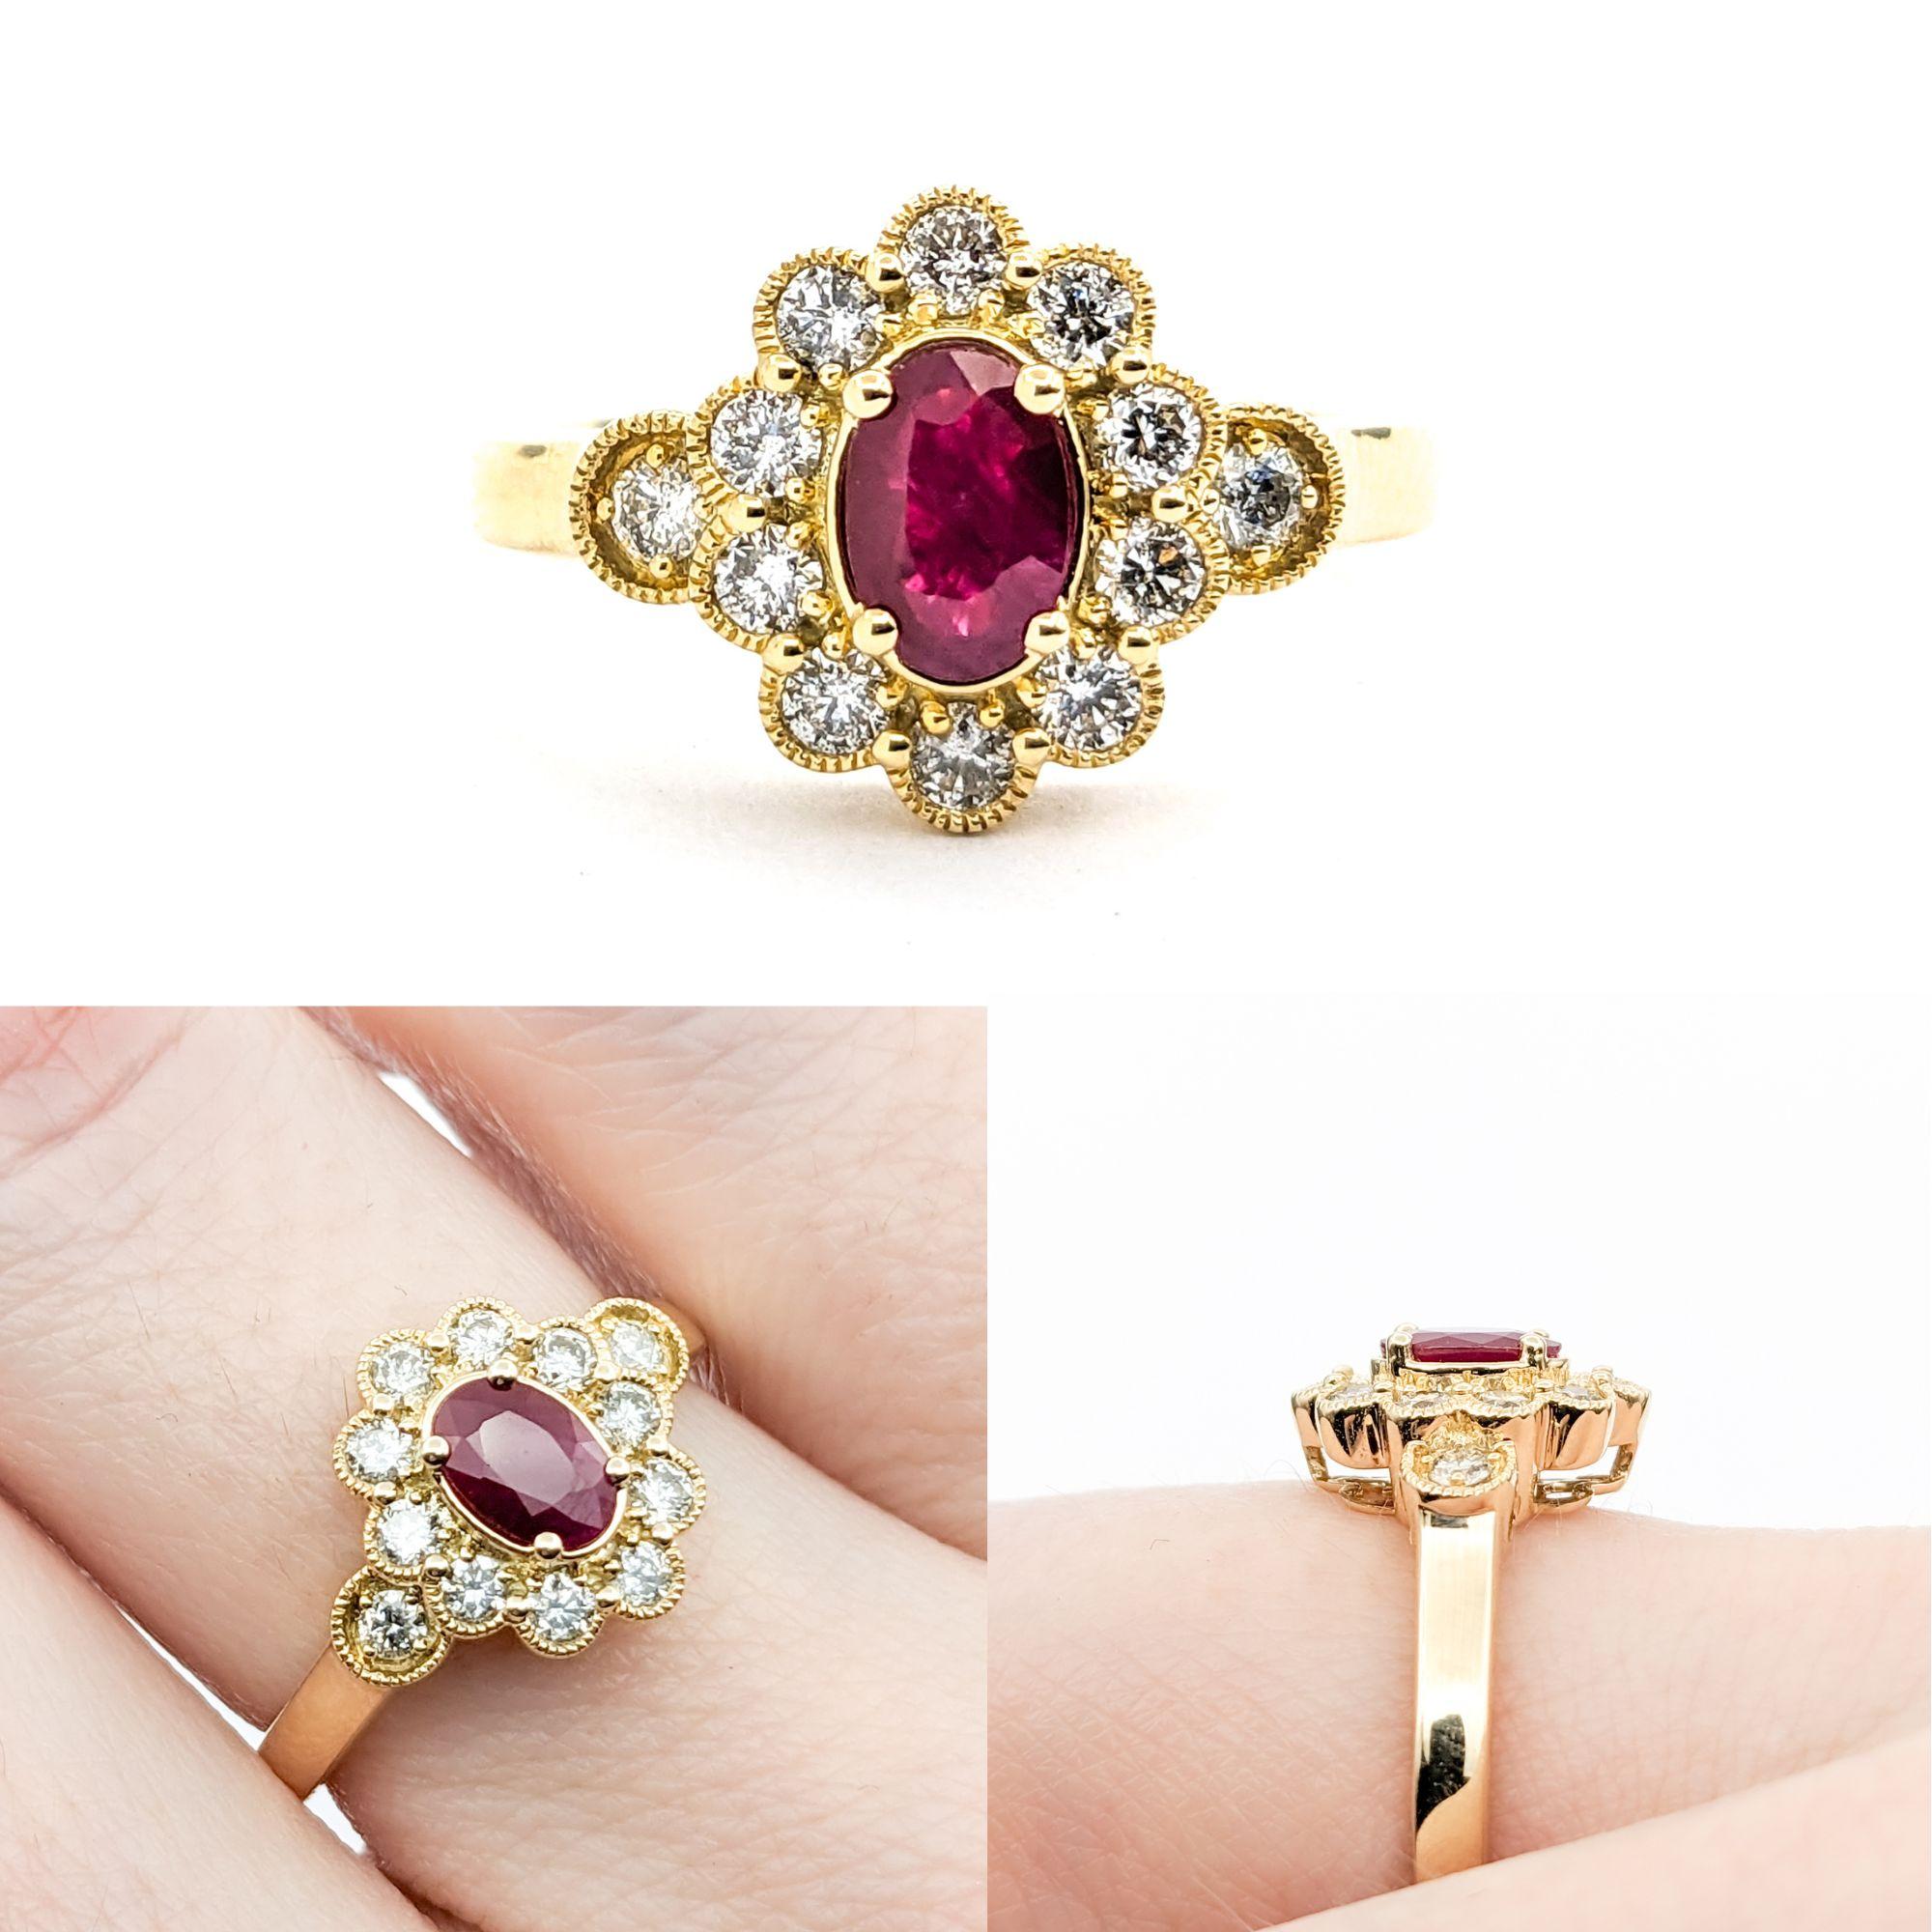 0.50ct Ruby & 0.41ctw Diamond Ring In Yellow Gold

Crafted in lustrous 14kt yellow gold, this elegant ring showcases a captivating 0.50ct ruby centerpiece, encircled by 0.41ctw of round diamonds. The diamonds, with their SI clarity and